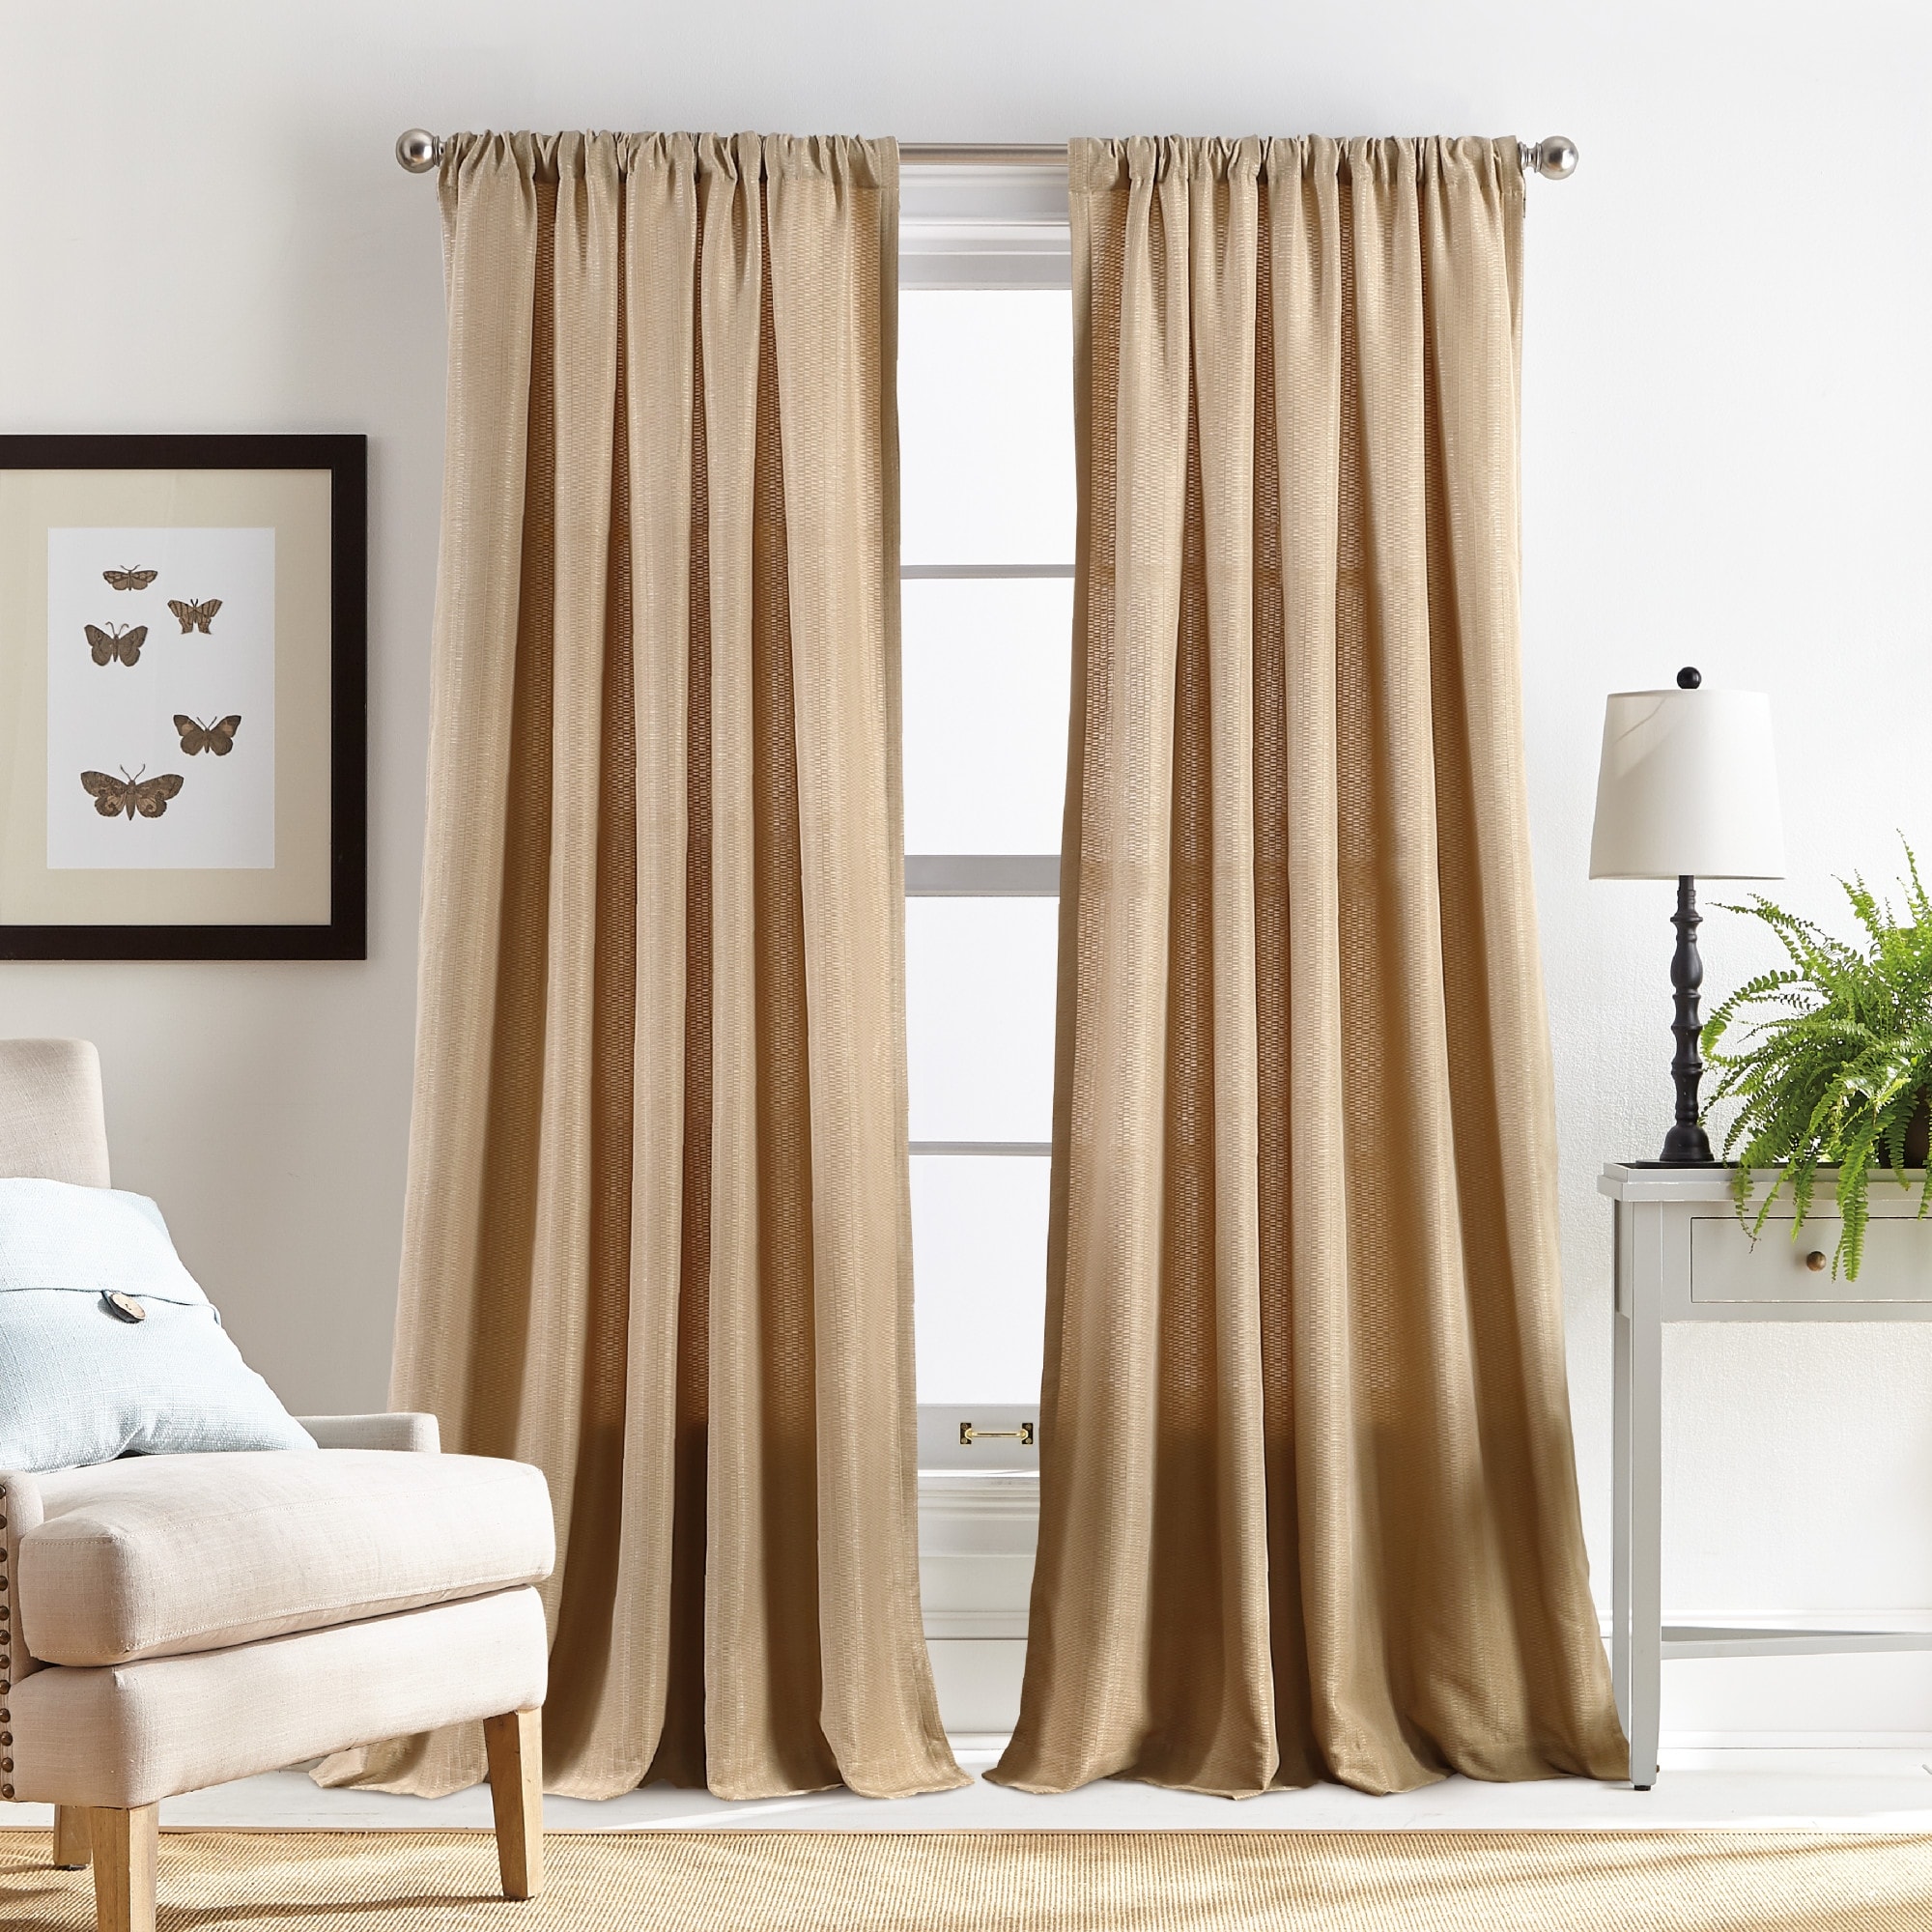 Small Window Curtain Natural linen stitching short curtains Rod Pocket curtain for bathroom Bedroom stitching curtains